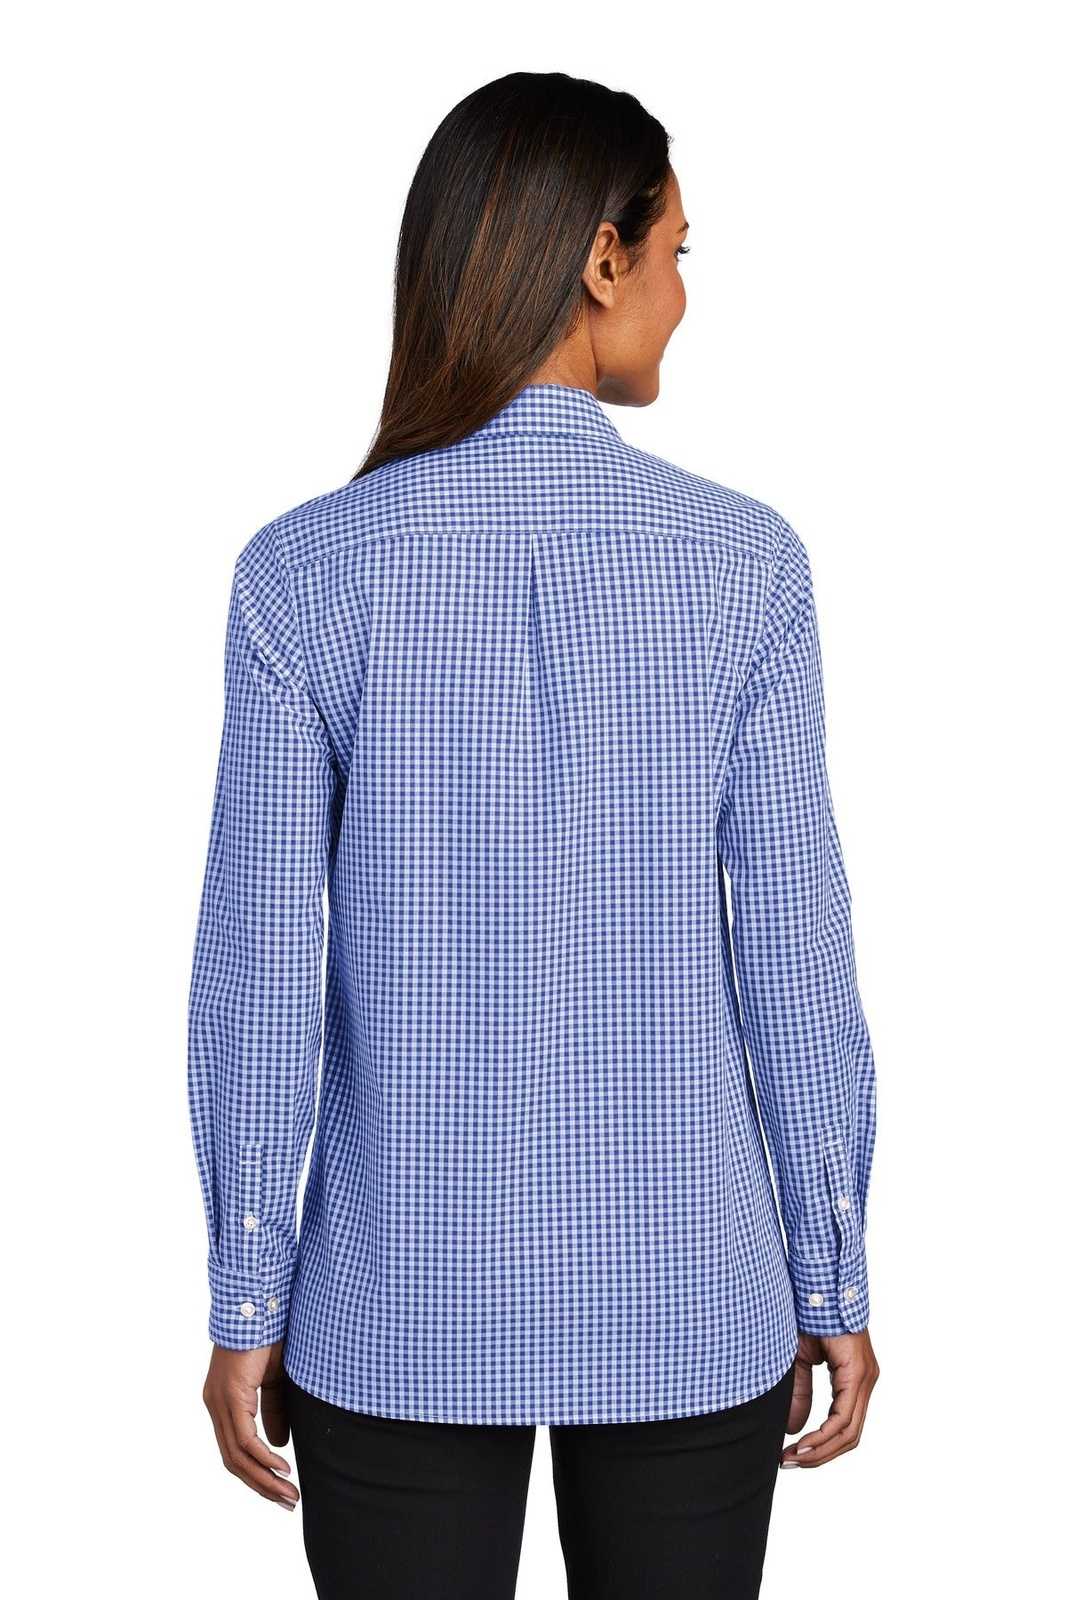 Port Authority LW644 Ladies Broadcloth Gingham Easy Care Shirt - True Royal White - HIT a Double - 2